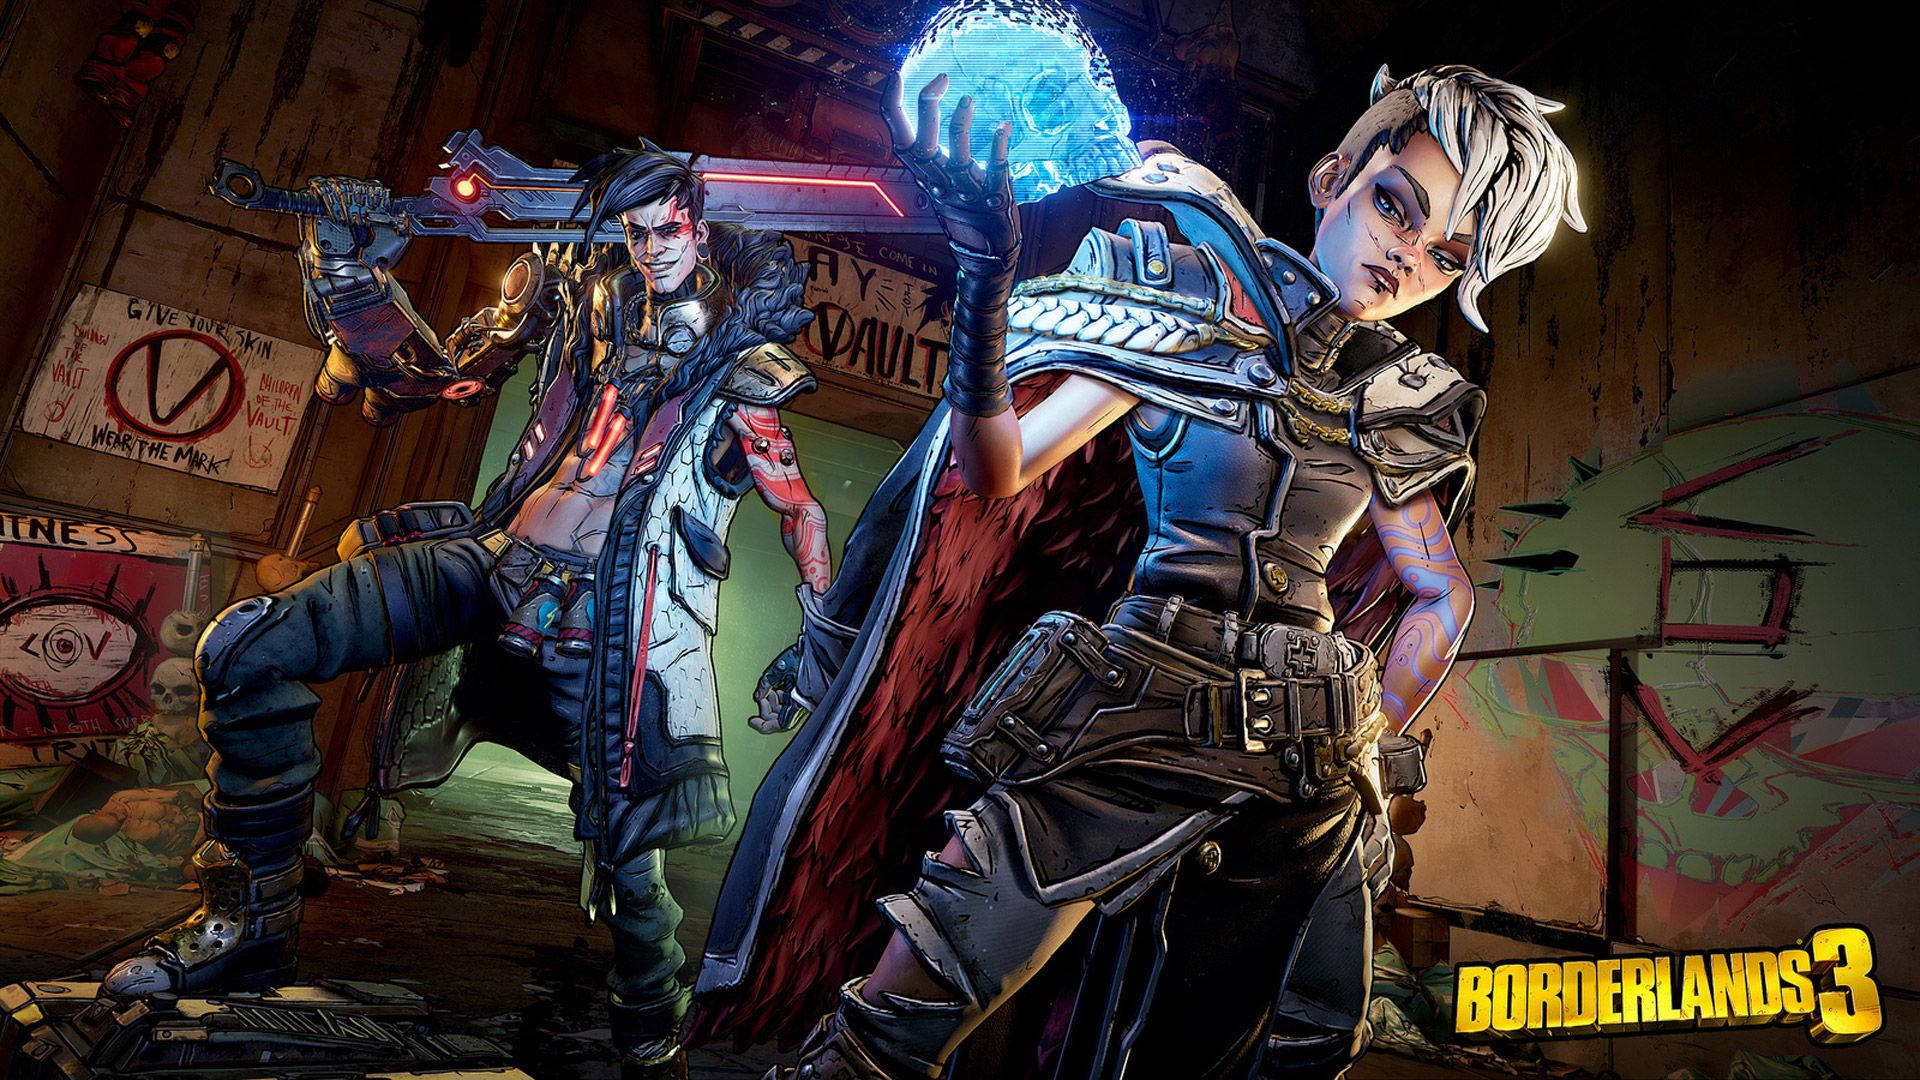 "Take a peek into the chaos of Borderlands 3 with Tyreen and Troy Calypso!" Wallpaper